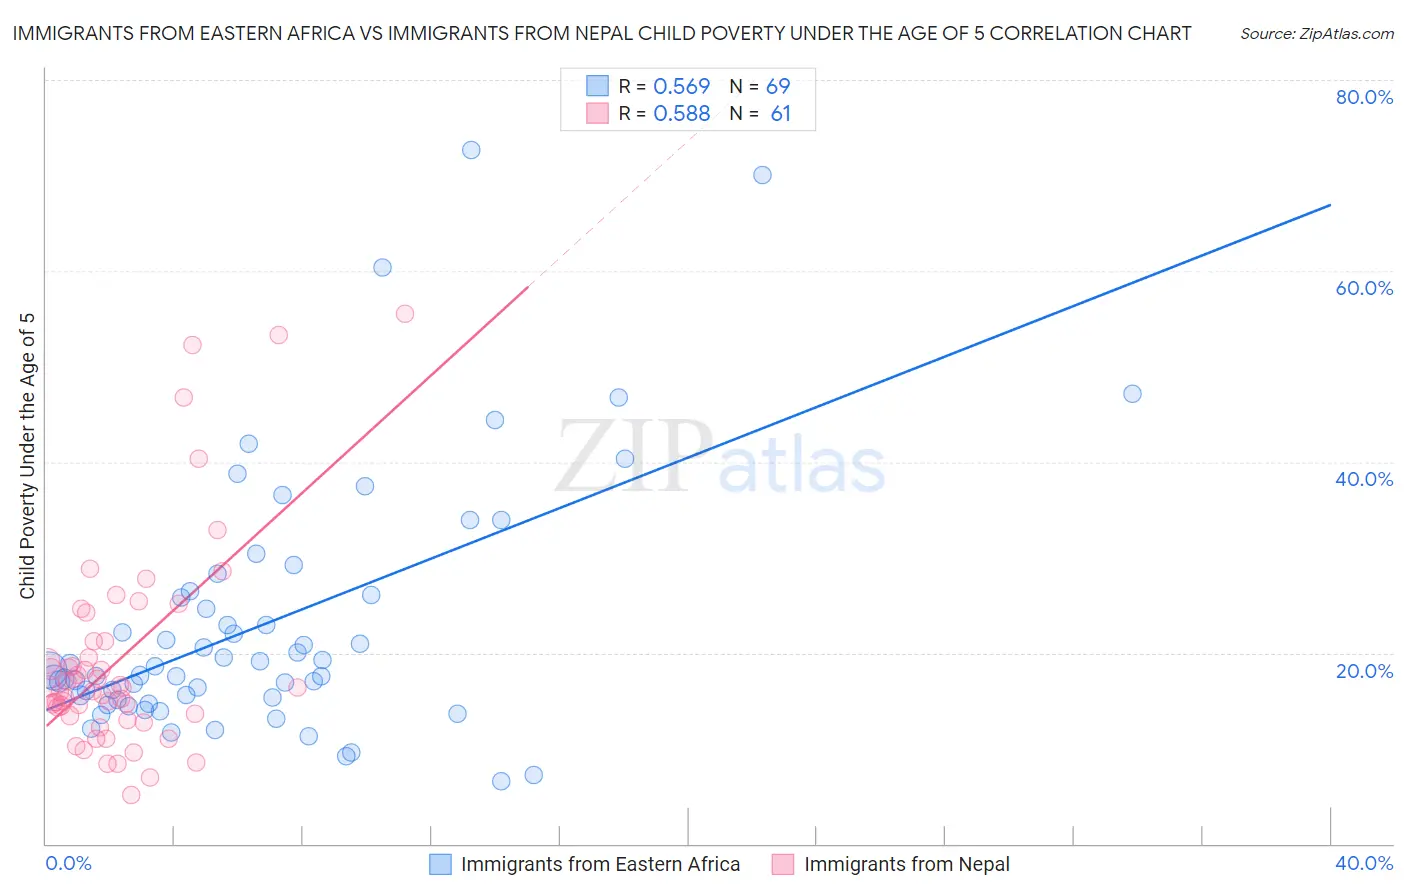 Immigrants from Eastern Africa vs Immigrants from Nepal Child Poverty Under the Age of 5